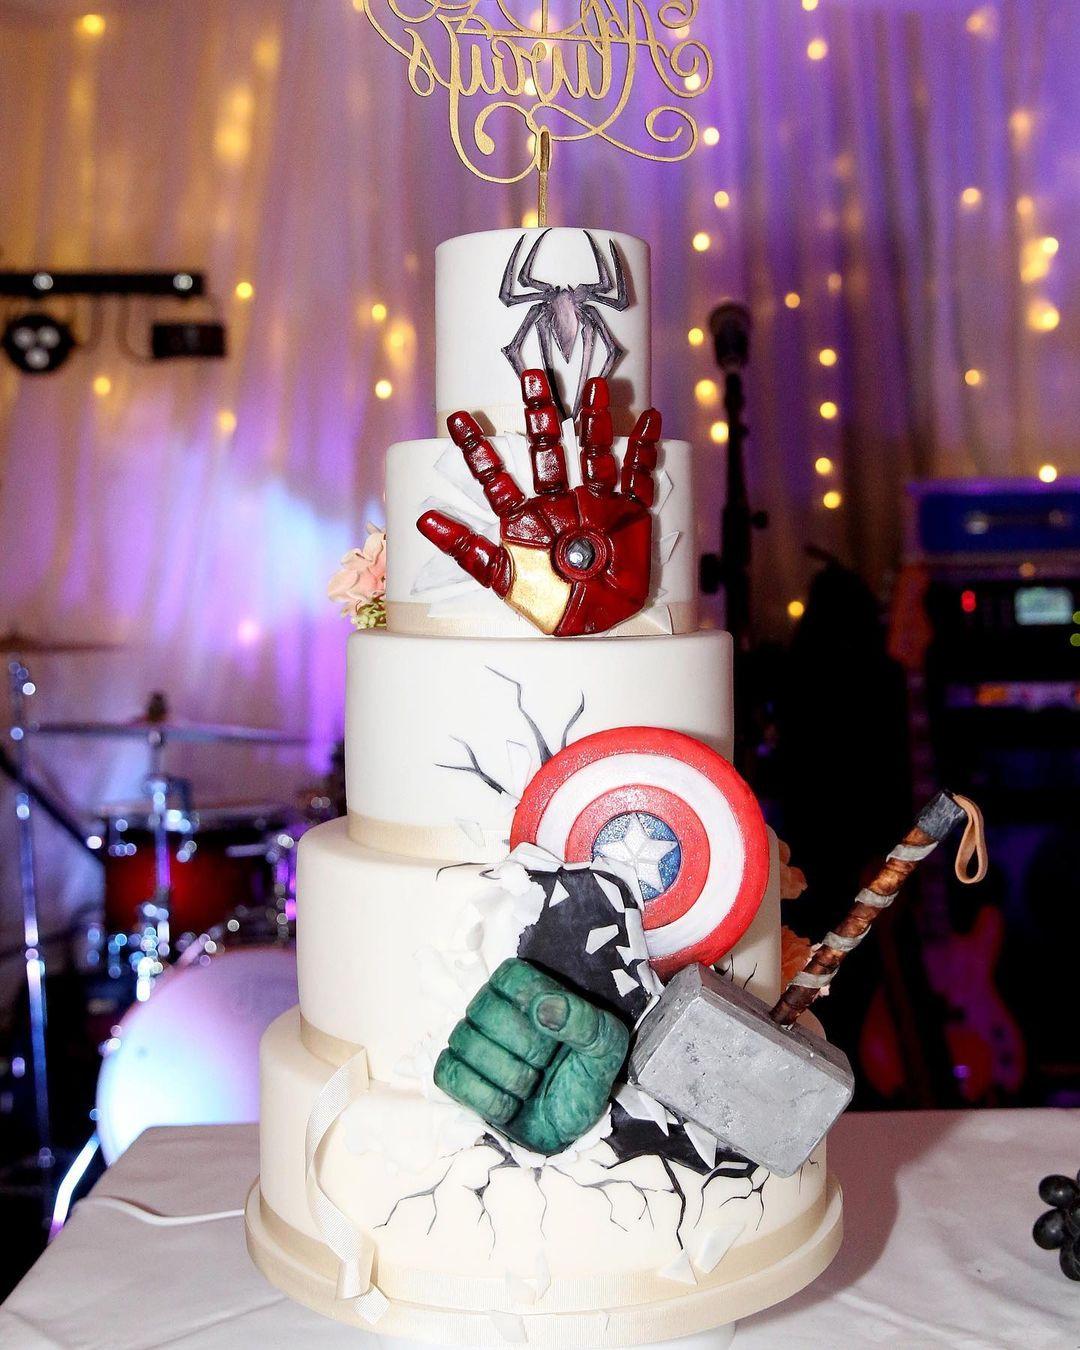 Harry Potter Themed Wedding Cakes for the Nerd in You